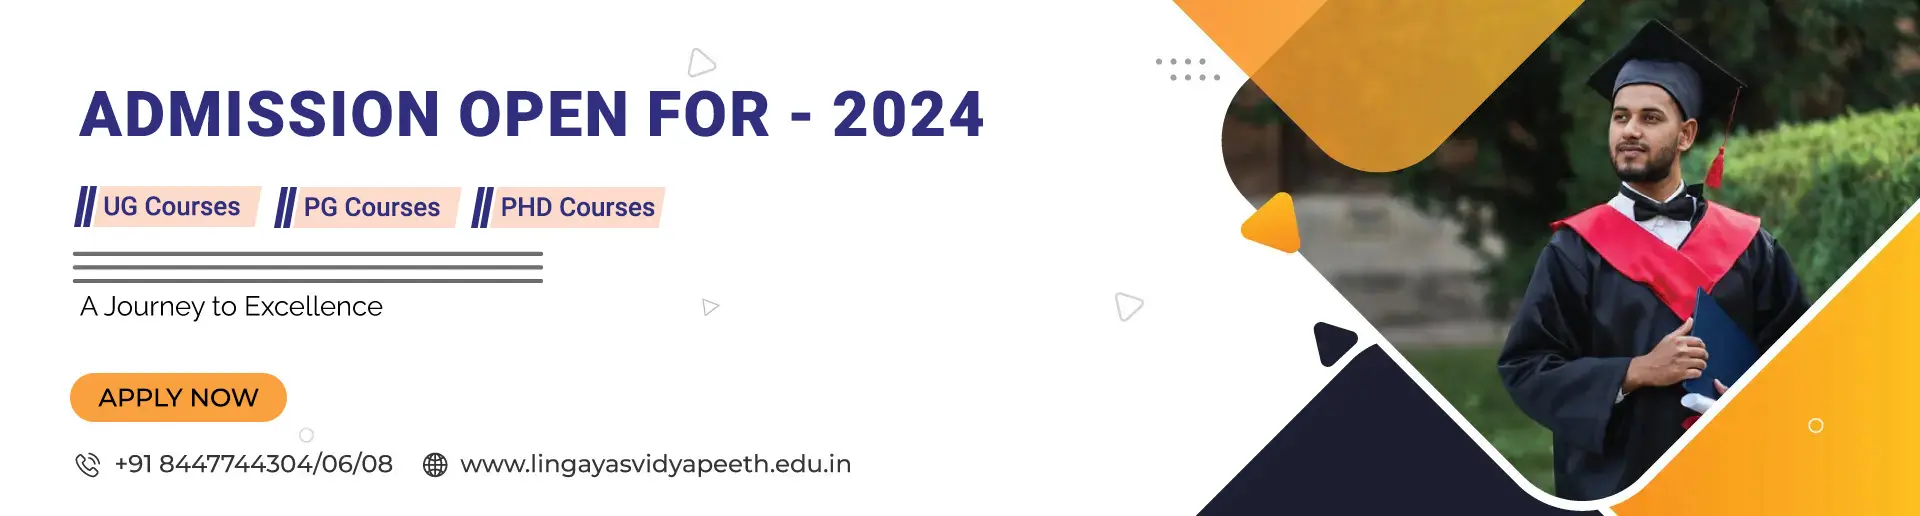 Admission 2024 banner landing page